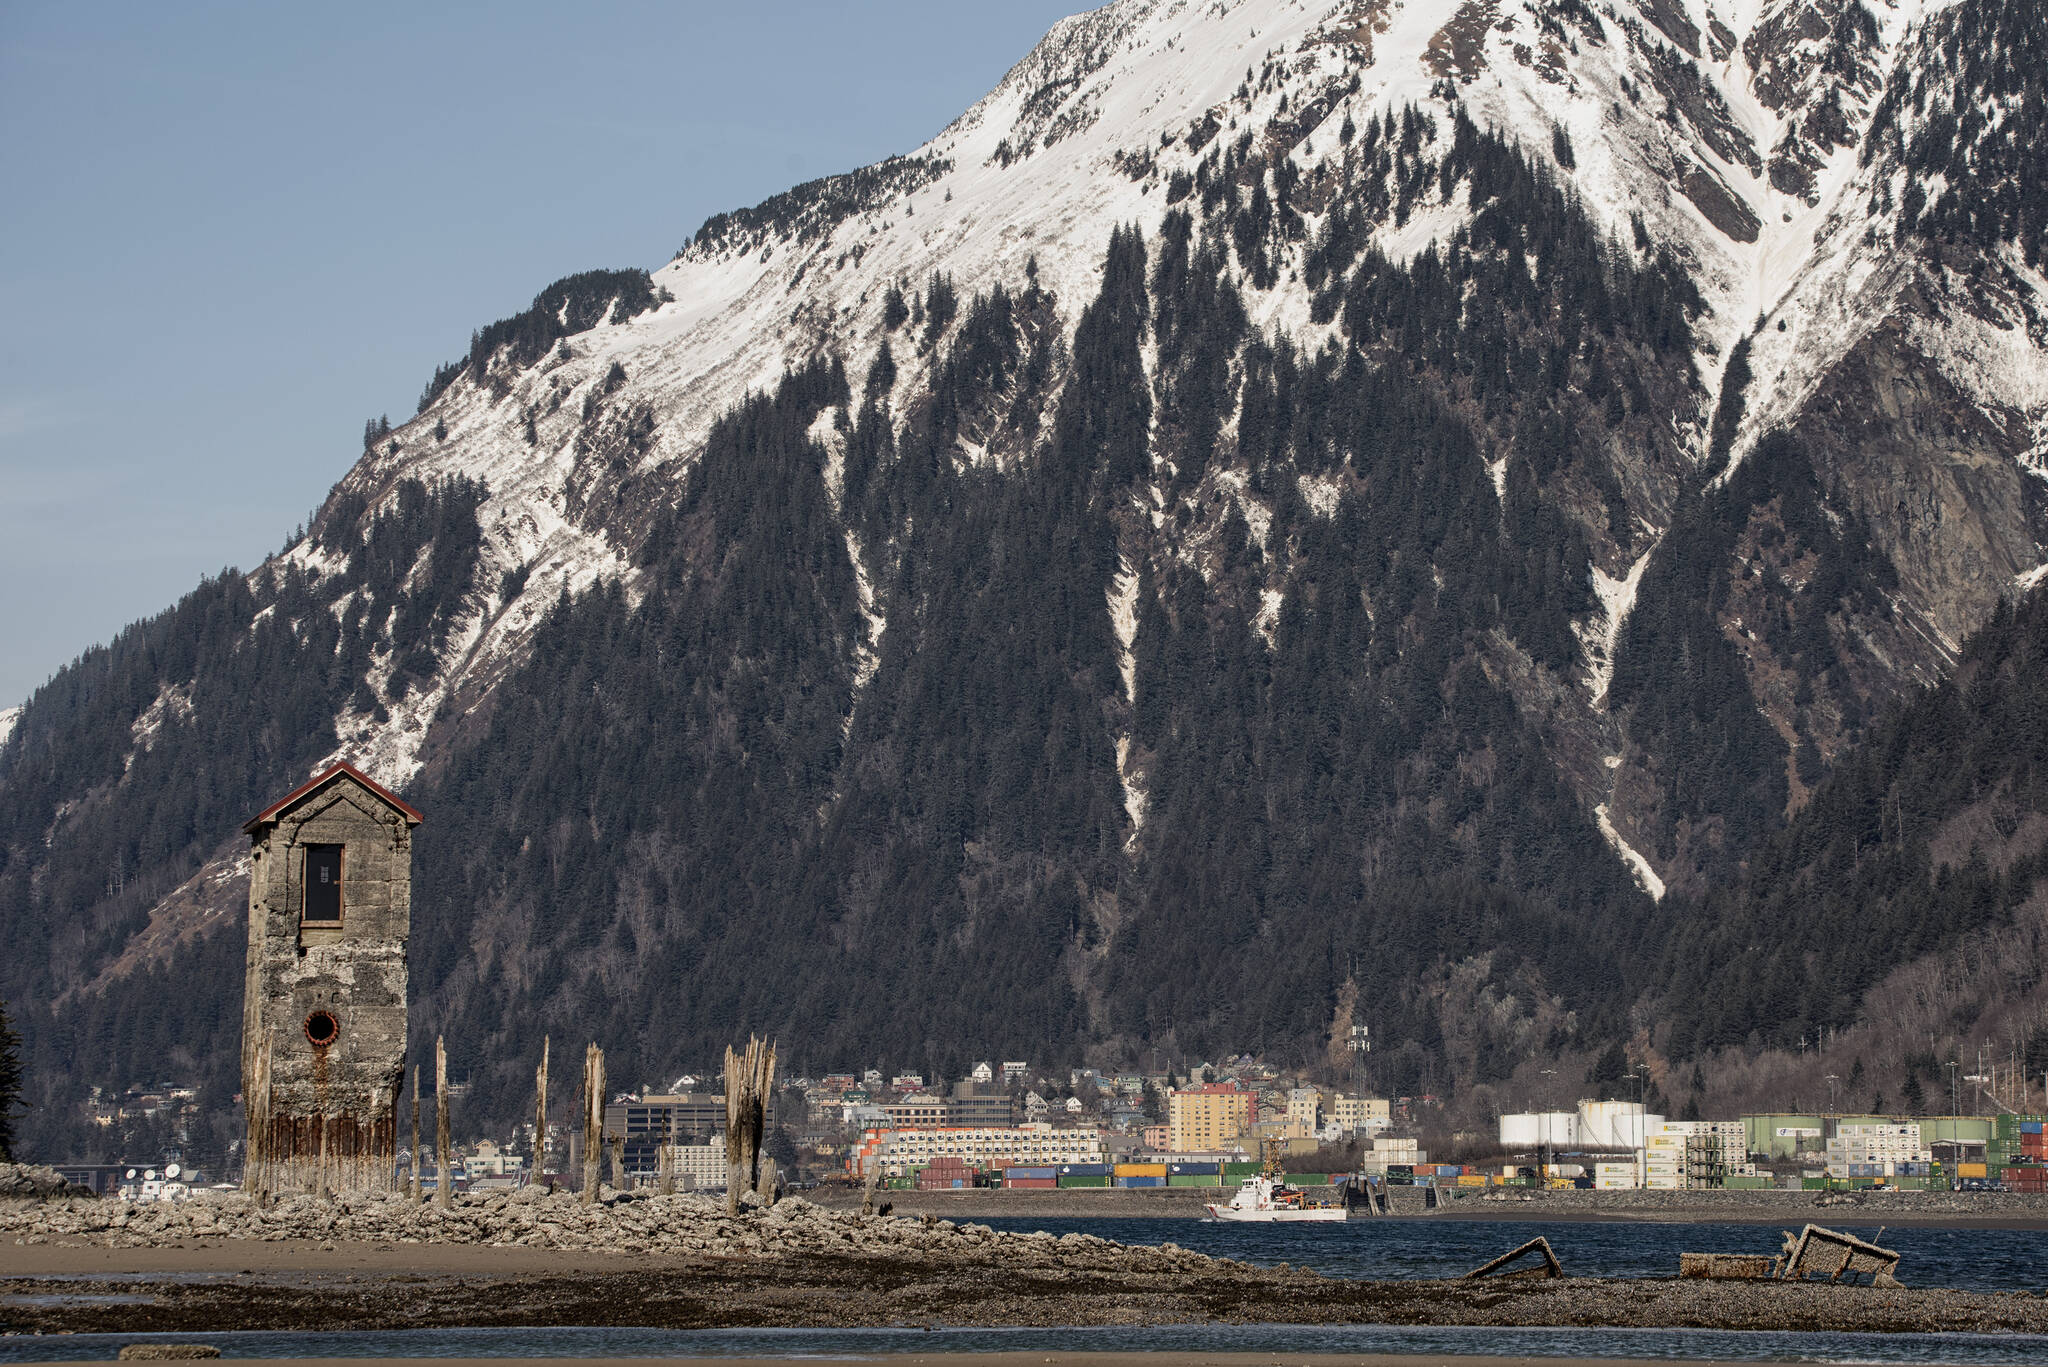 Treadwell Pump house (foreground) with the Port of Juneau and Mount Juneau, Southeast Alaska. (Kenneth Gill, gillfoto)